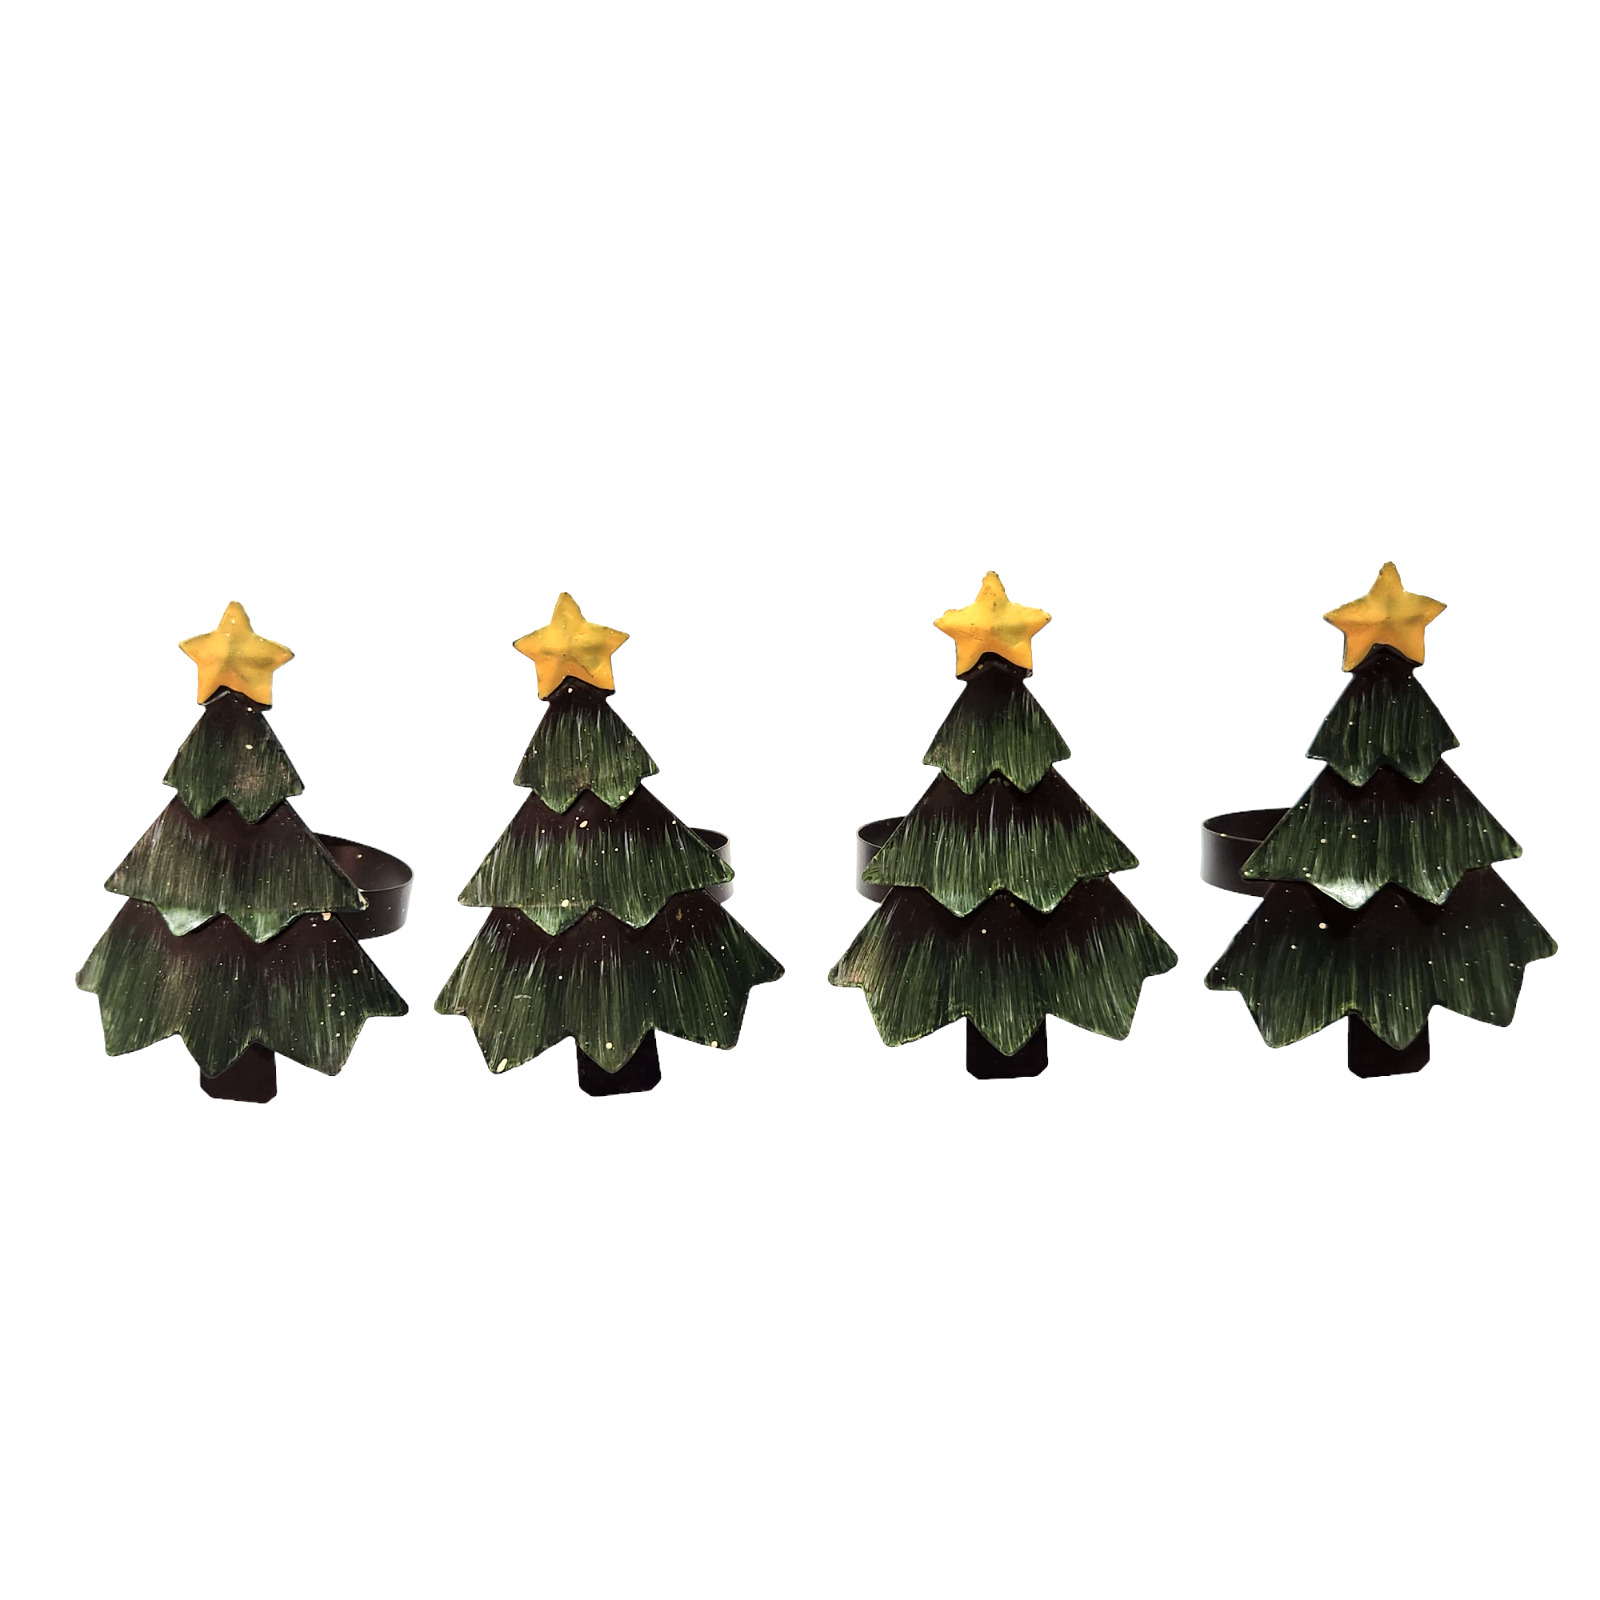 New Set of 4 Green with Snow Accents Metal Christmas Tree Napkin Rings Holders